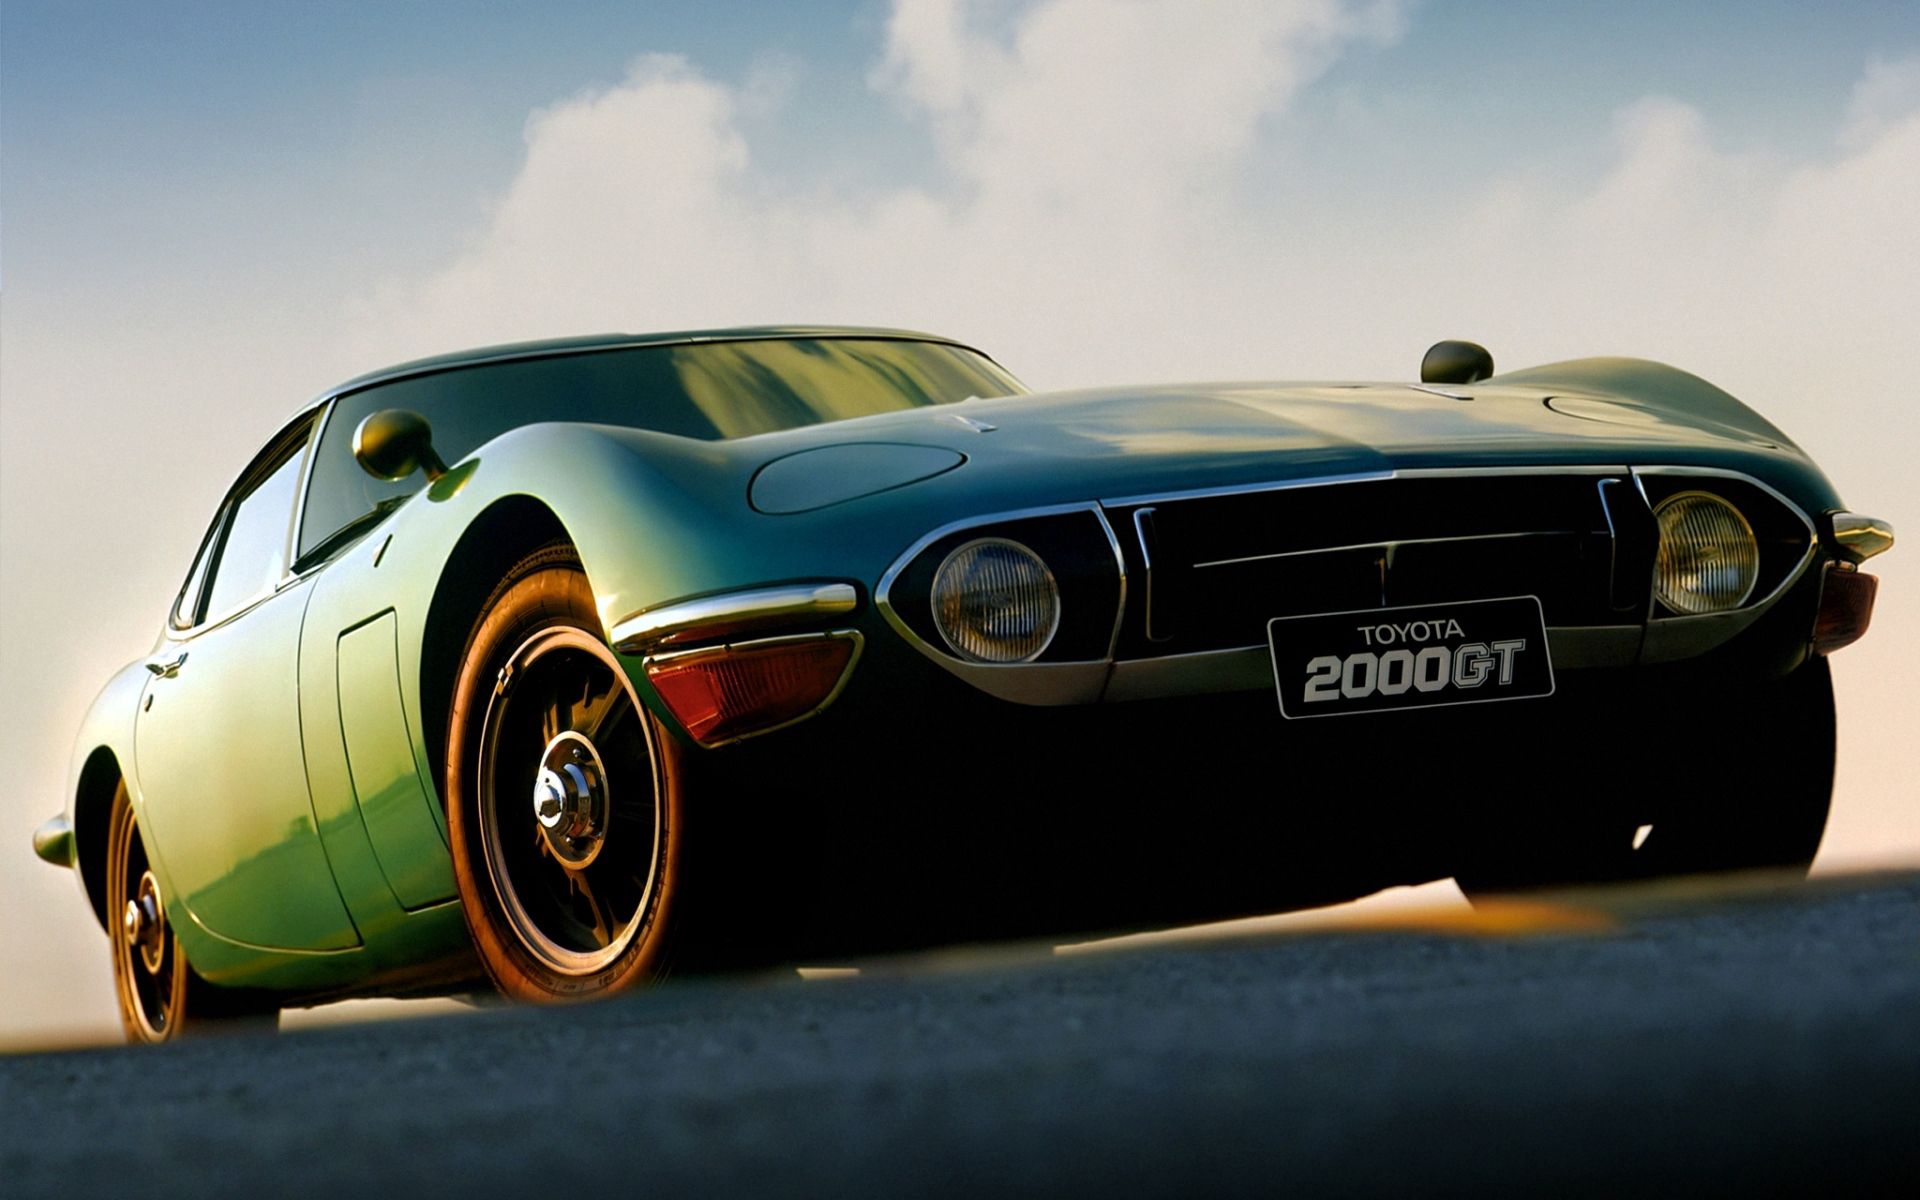 toyota, cars, green, front view, 1970, 2000gt Full HD